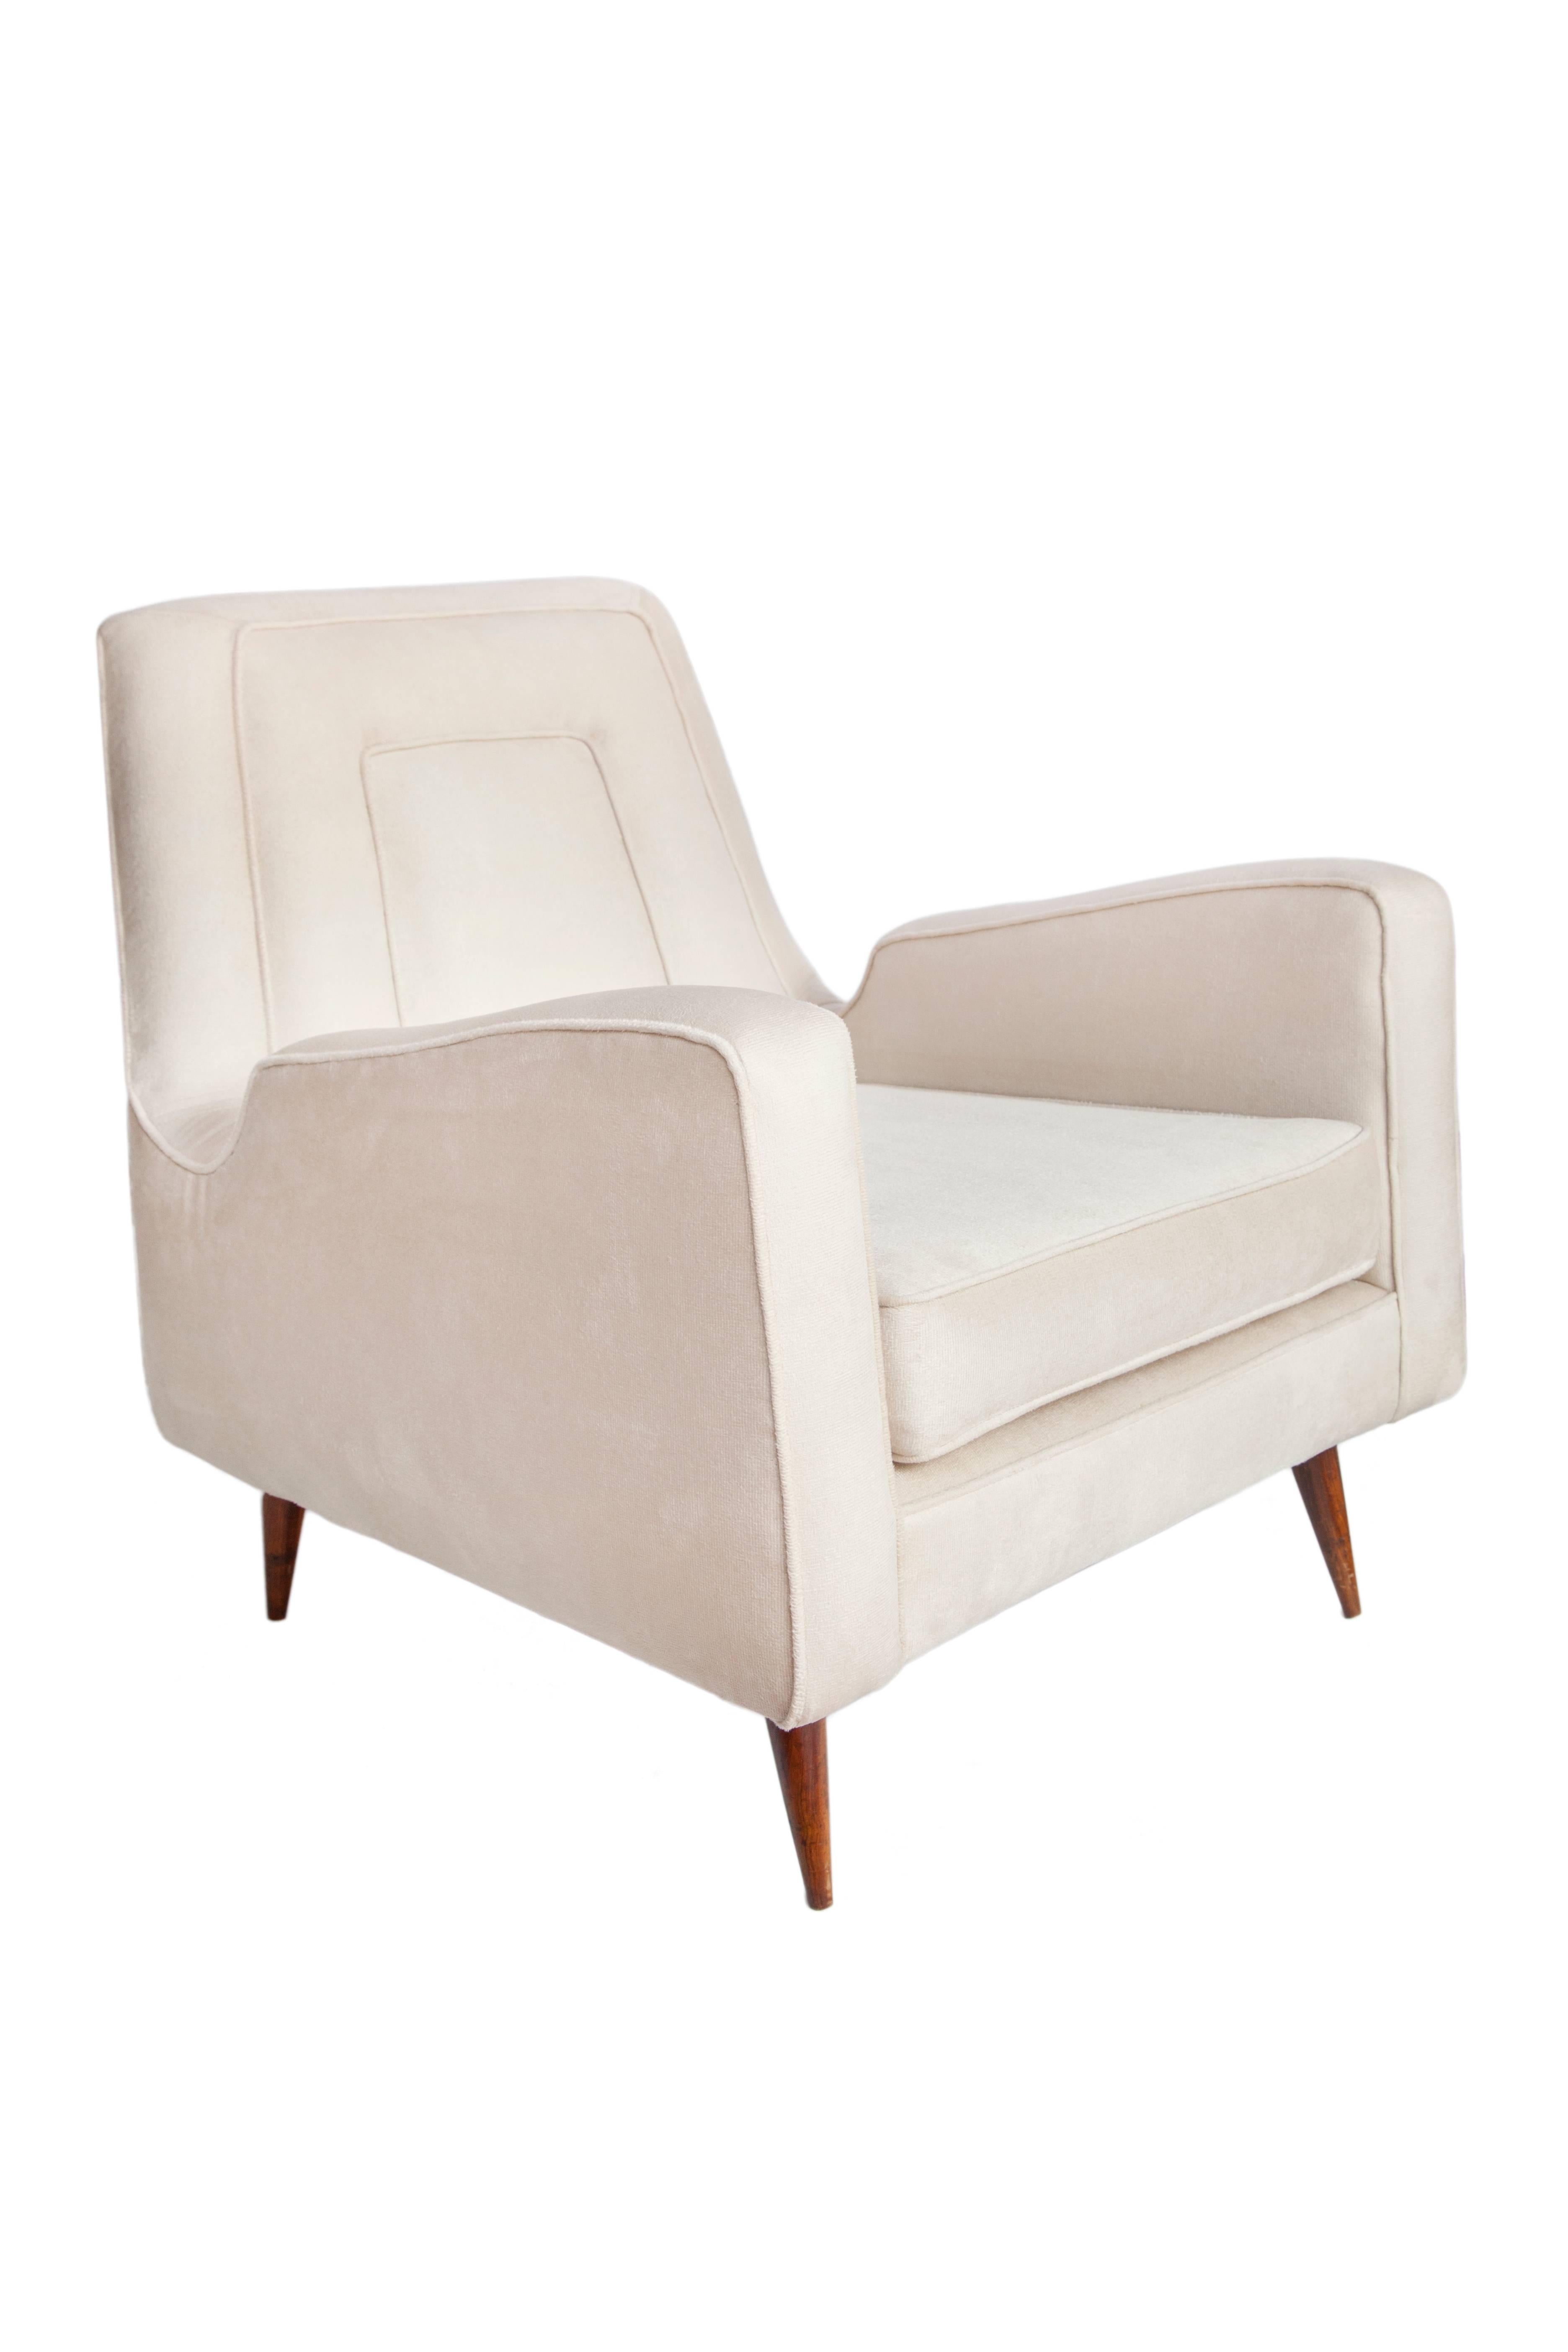 Wood Brazilian Mid-Century Modern Armchairs in Artificial Suede